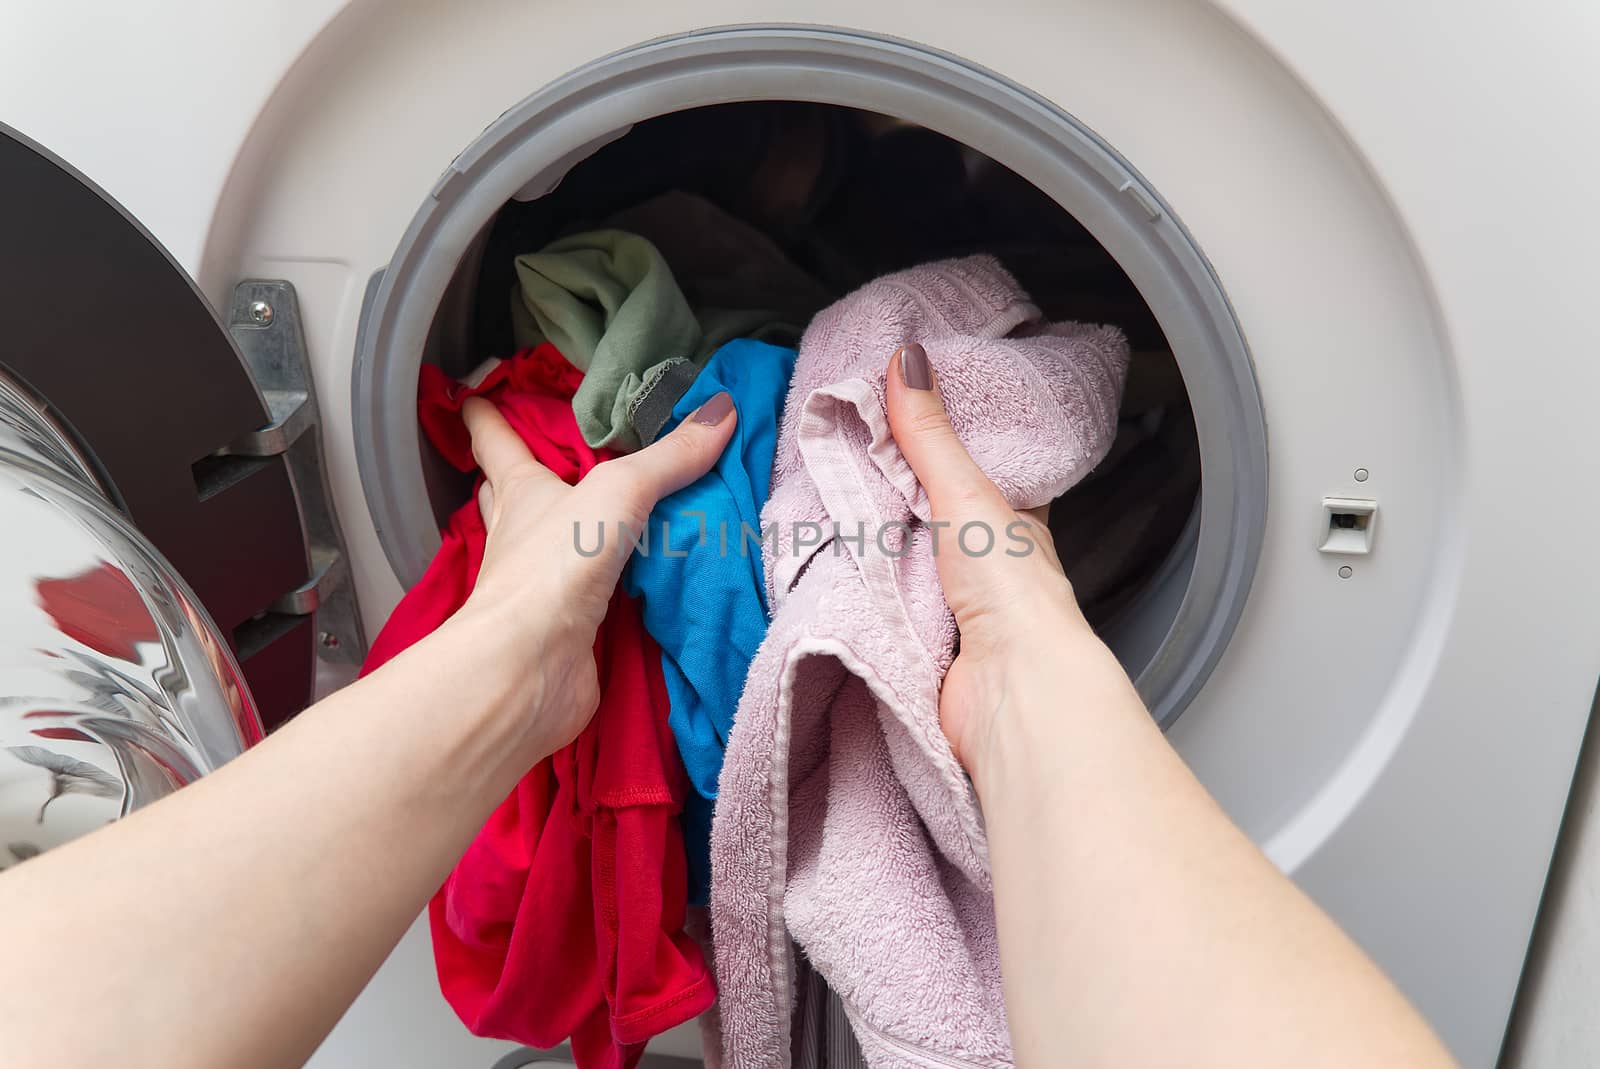 white front-loading washing machine, full of clothes. cleaning laundry. dirty laundry in the washing machine